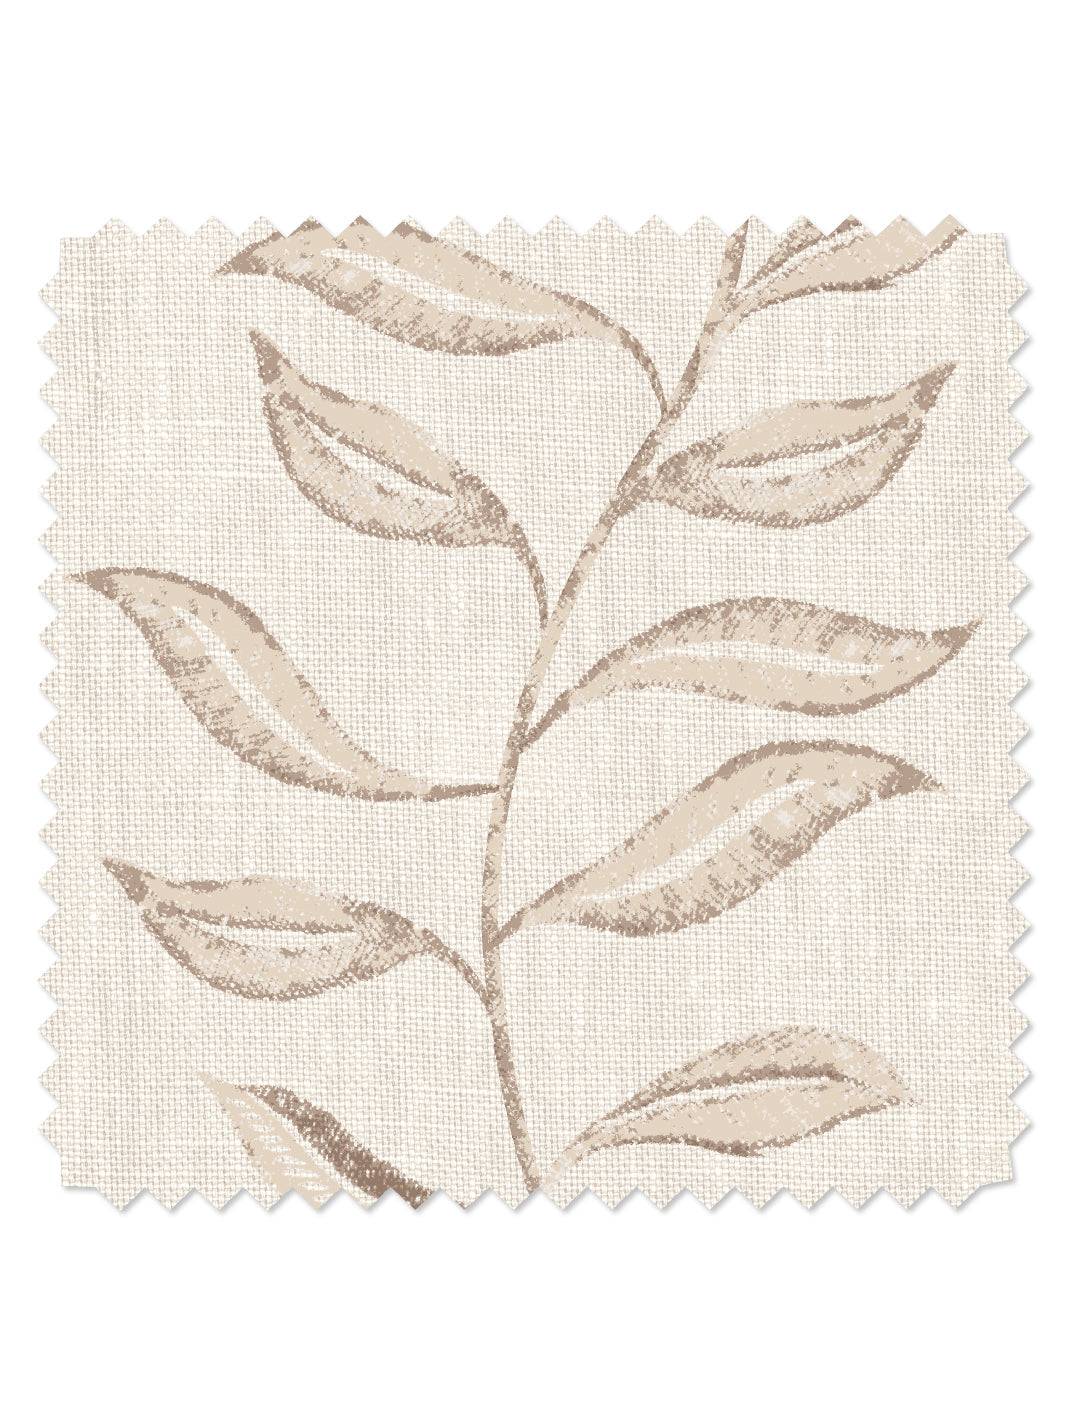 'Seneca' Linen Fabric by Nathan Turner - Neutral